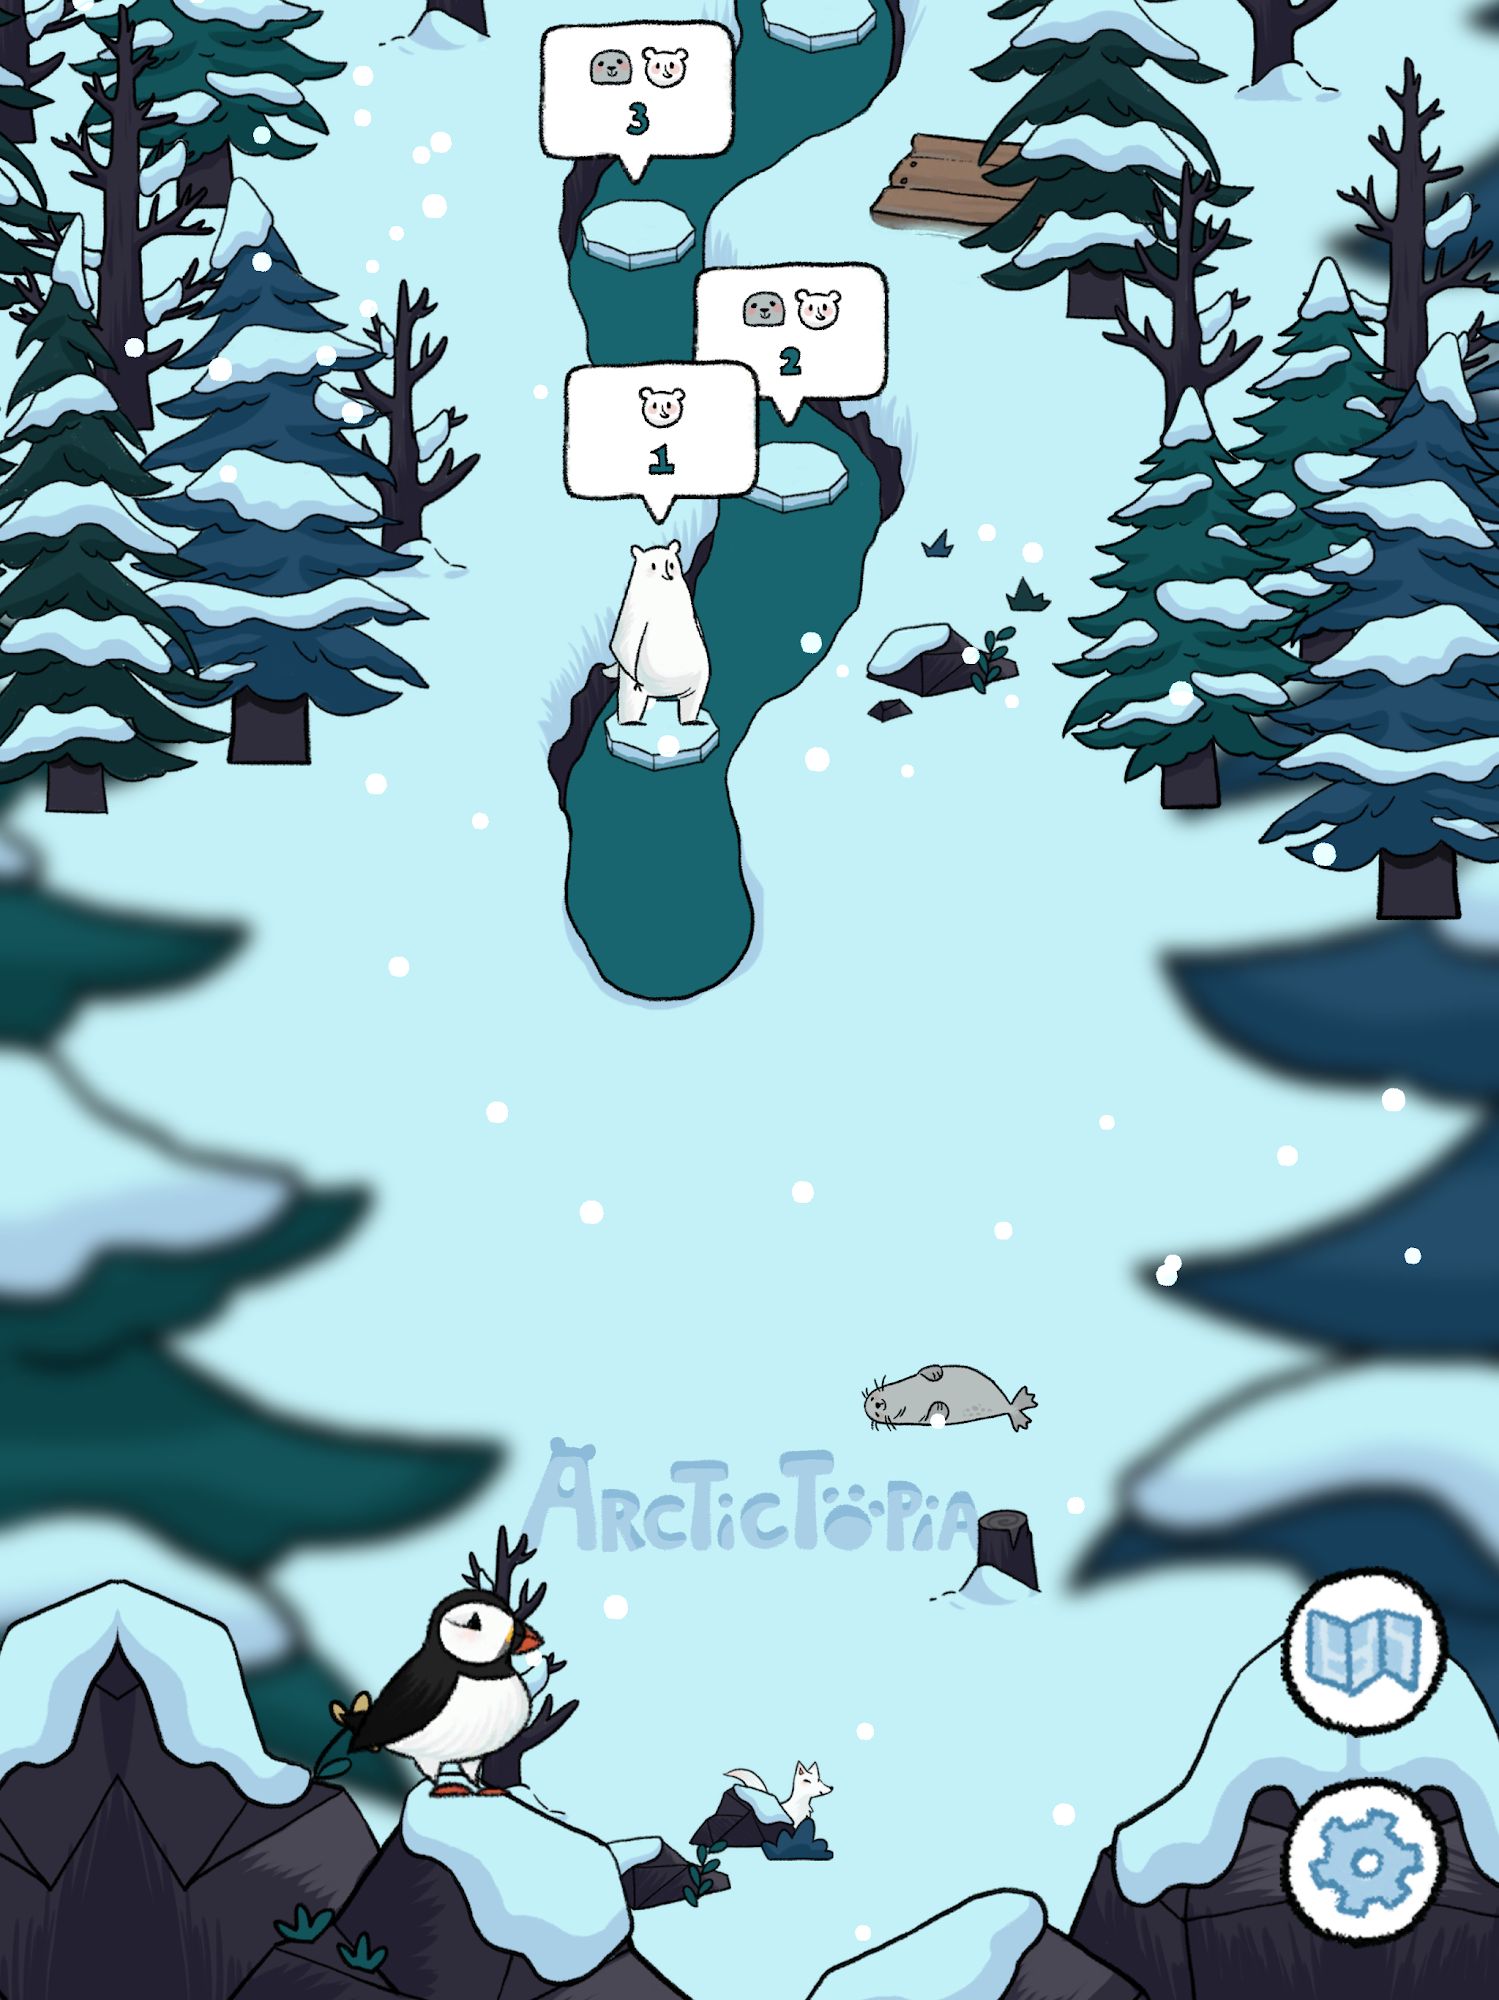 Download Arctictopia Android free game.